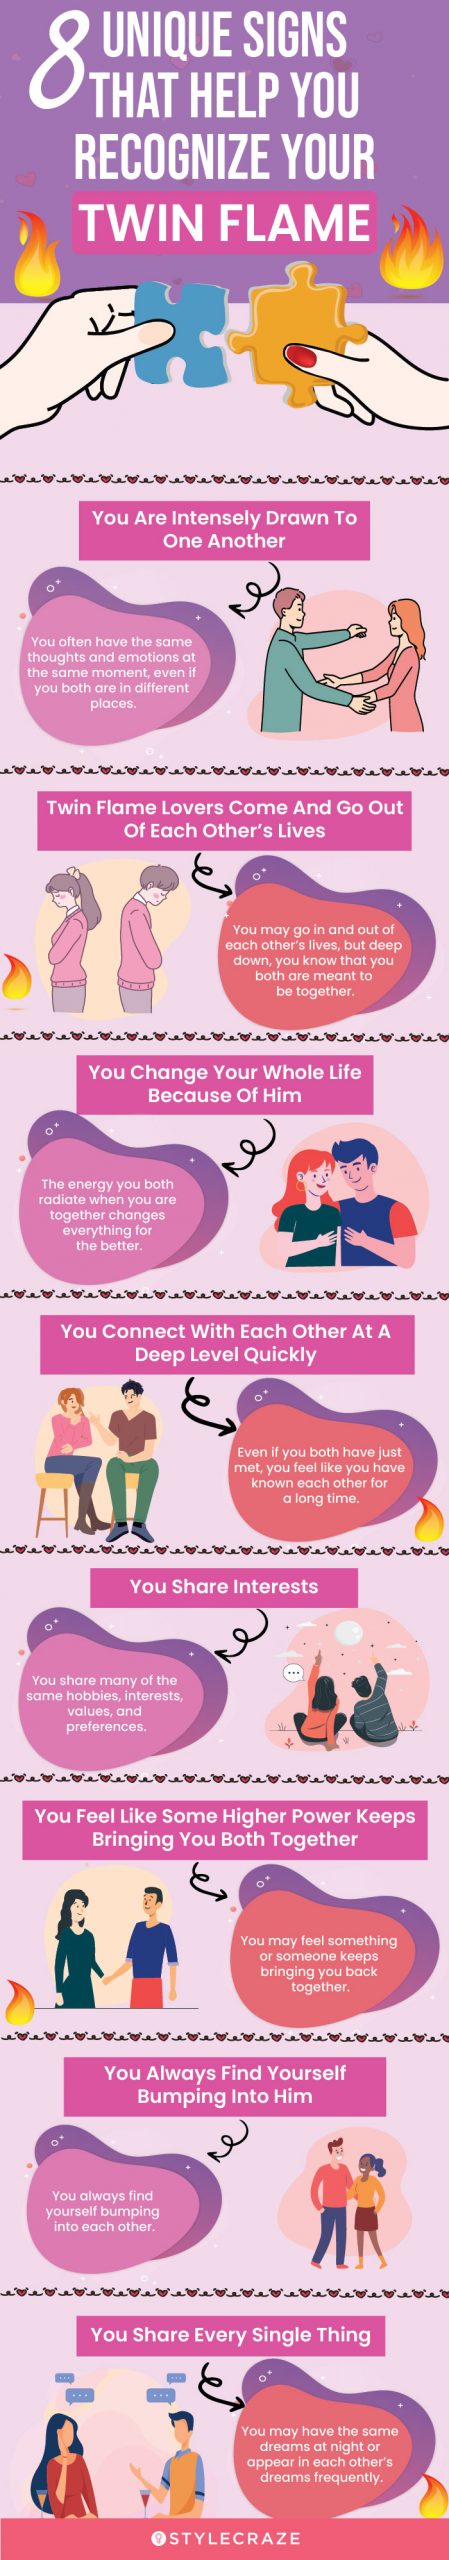 8 unique signs that help you recognize your twin flame (infographic)